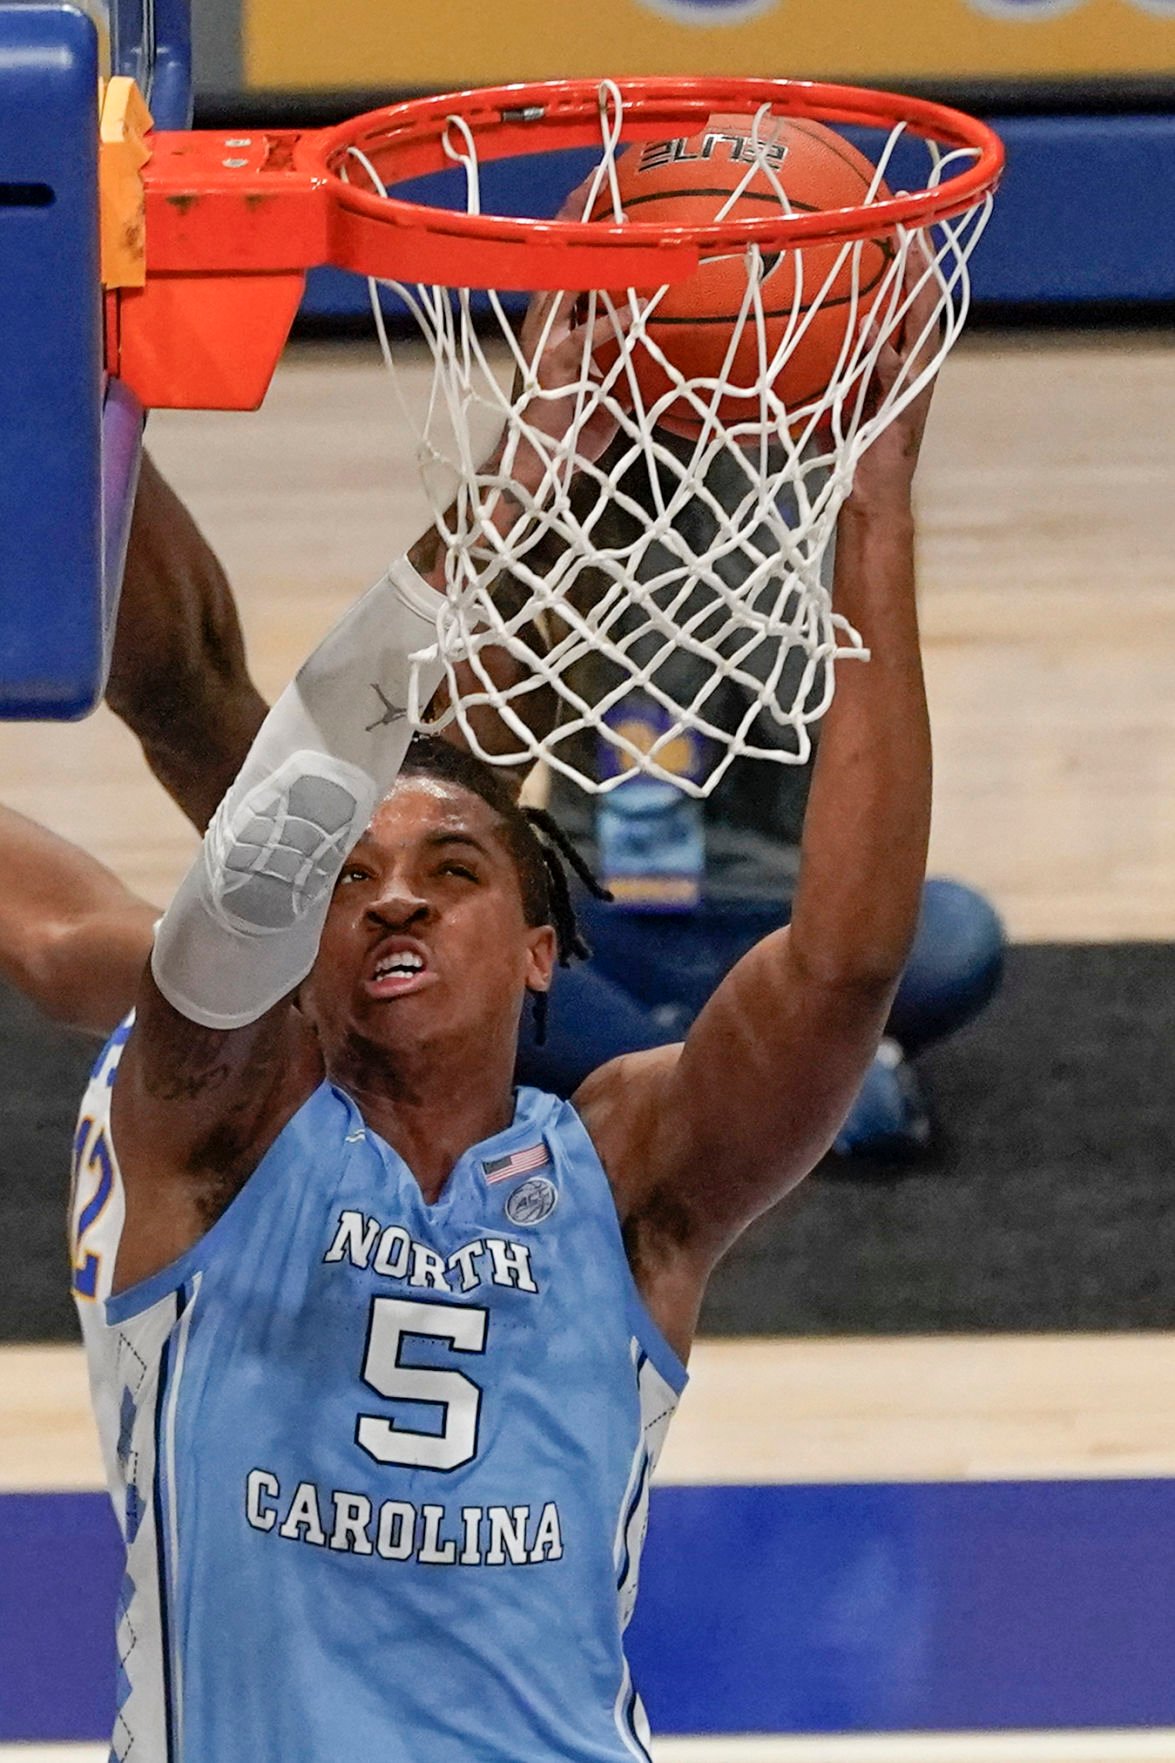 North Carolina has the pedigree, experience and defense to win it all